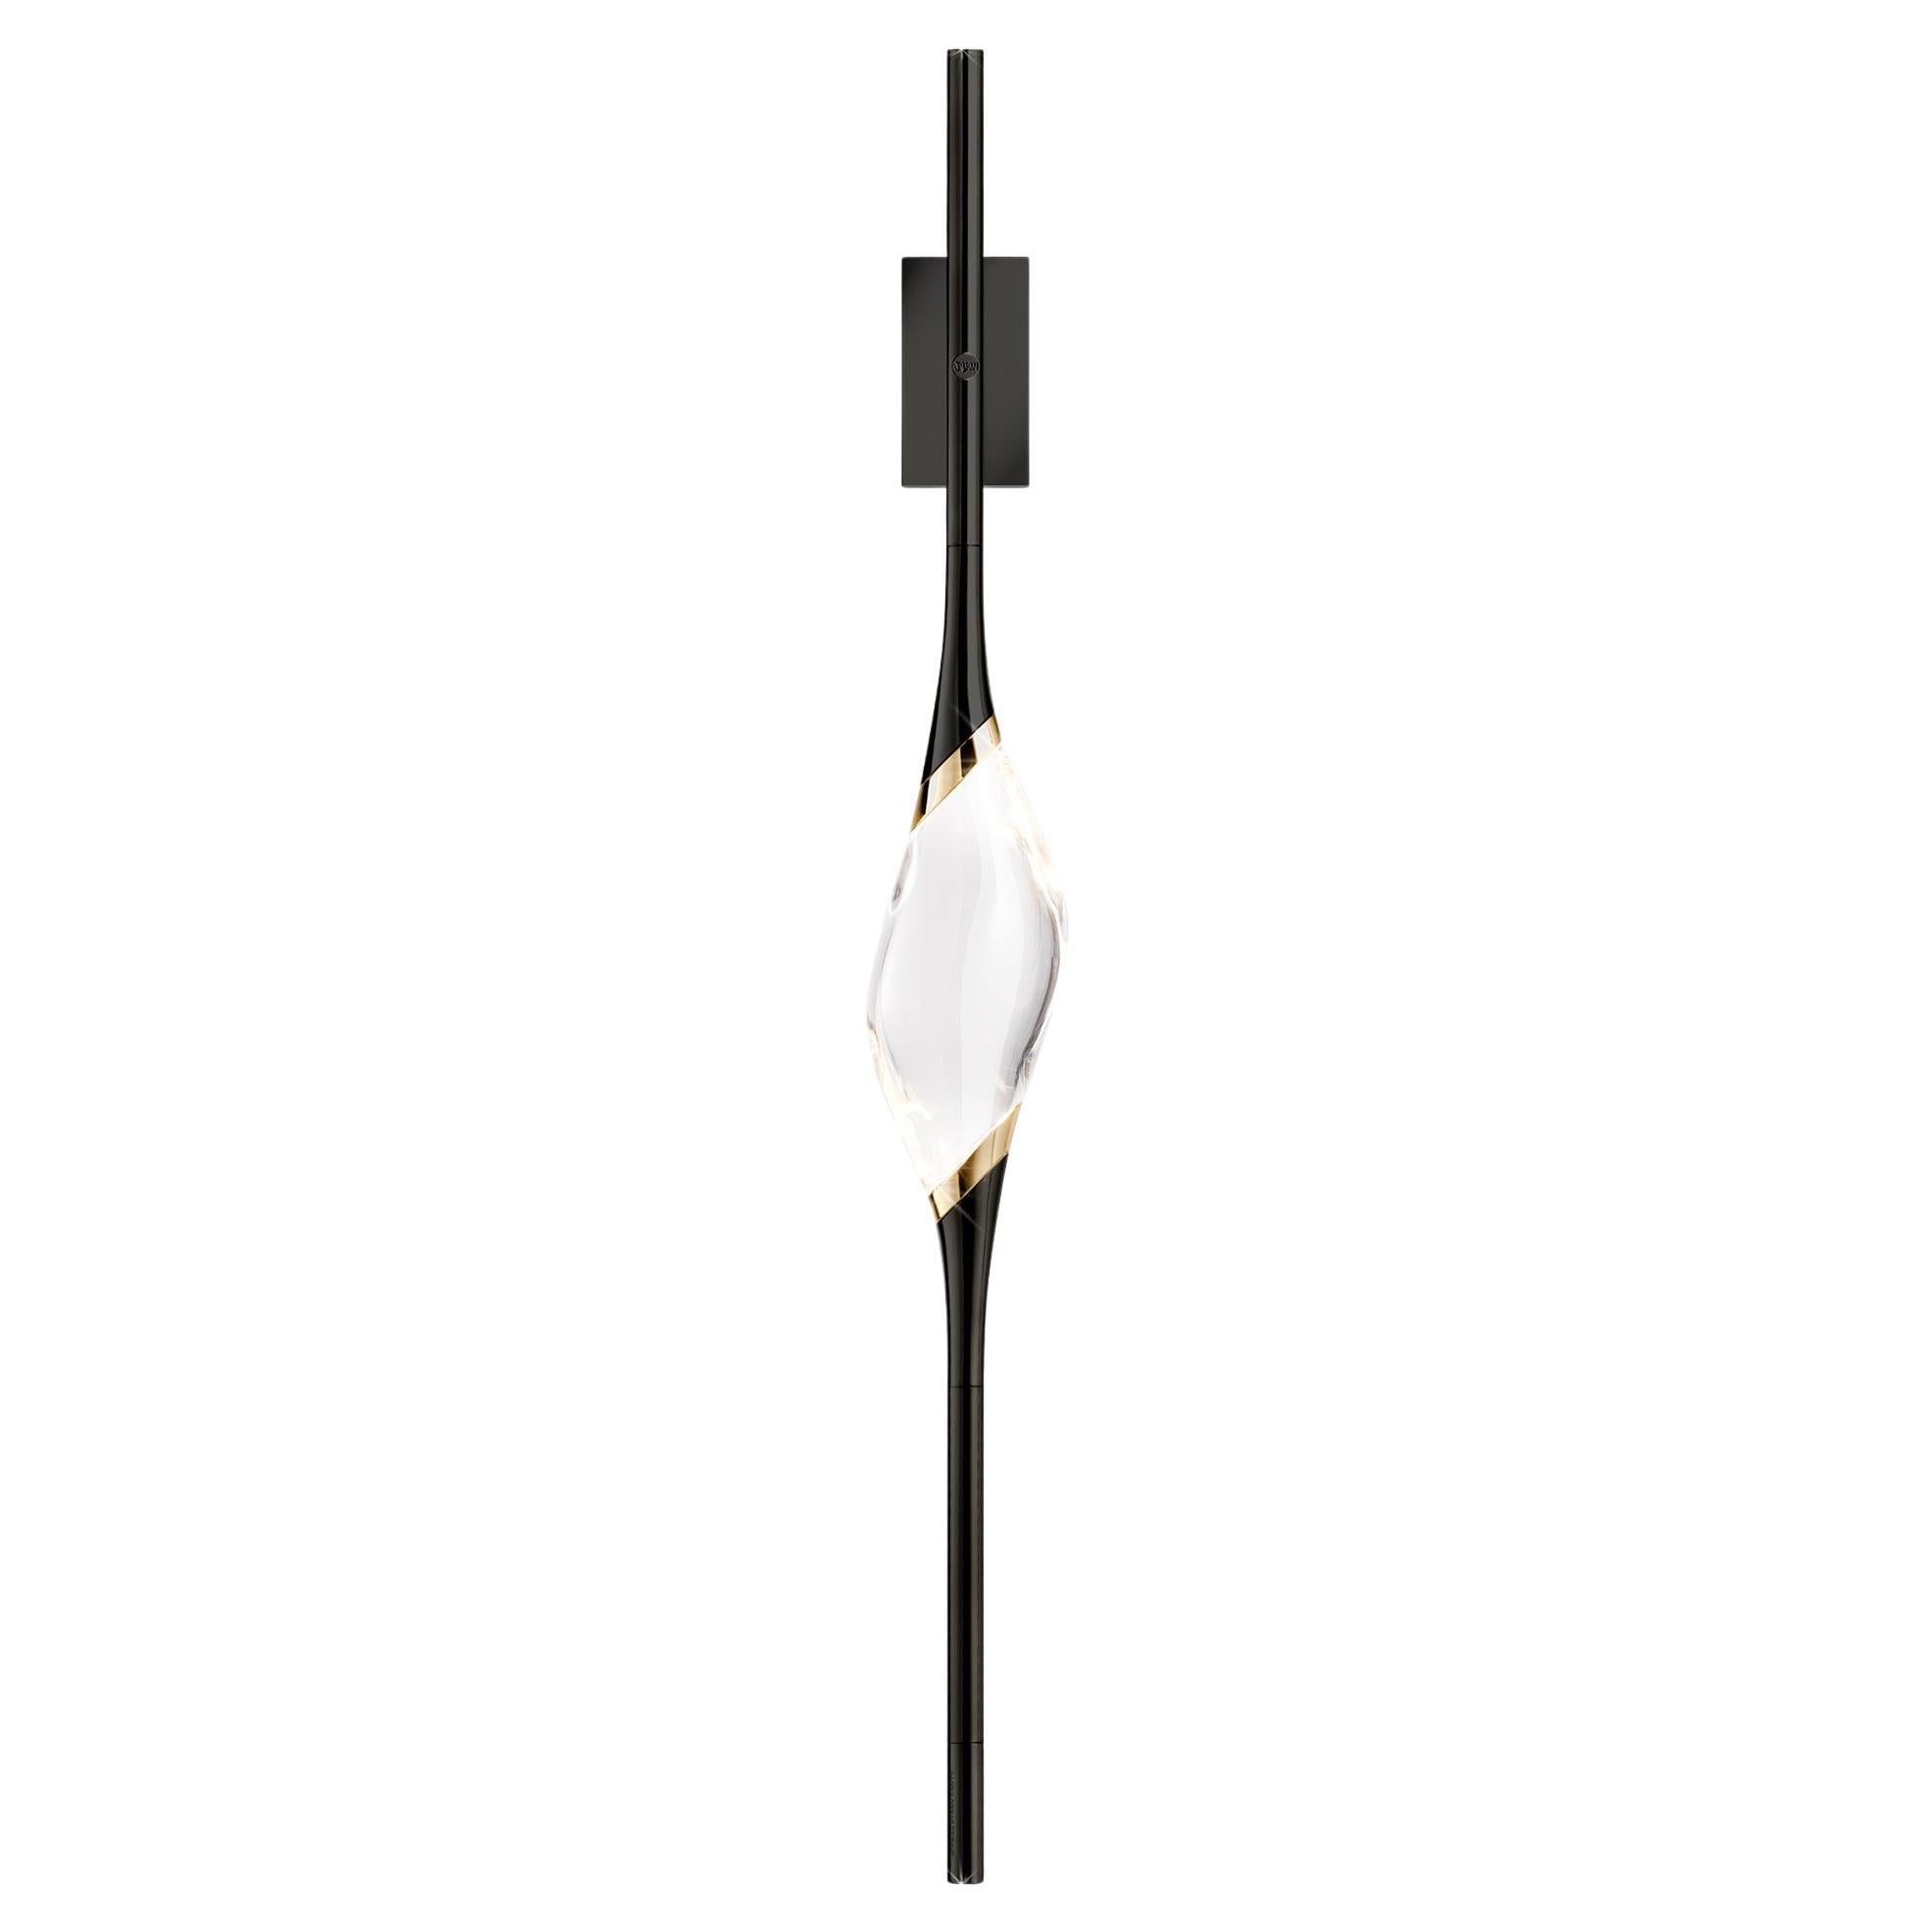 "Il Pezzo 12 Wall Sconce" - black and polished brass - crystal - Made in Italy For Sale